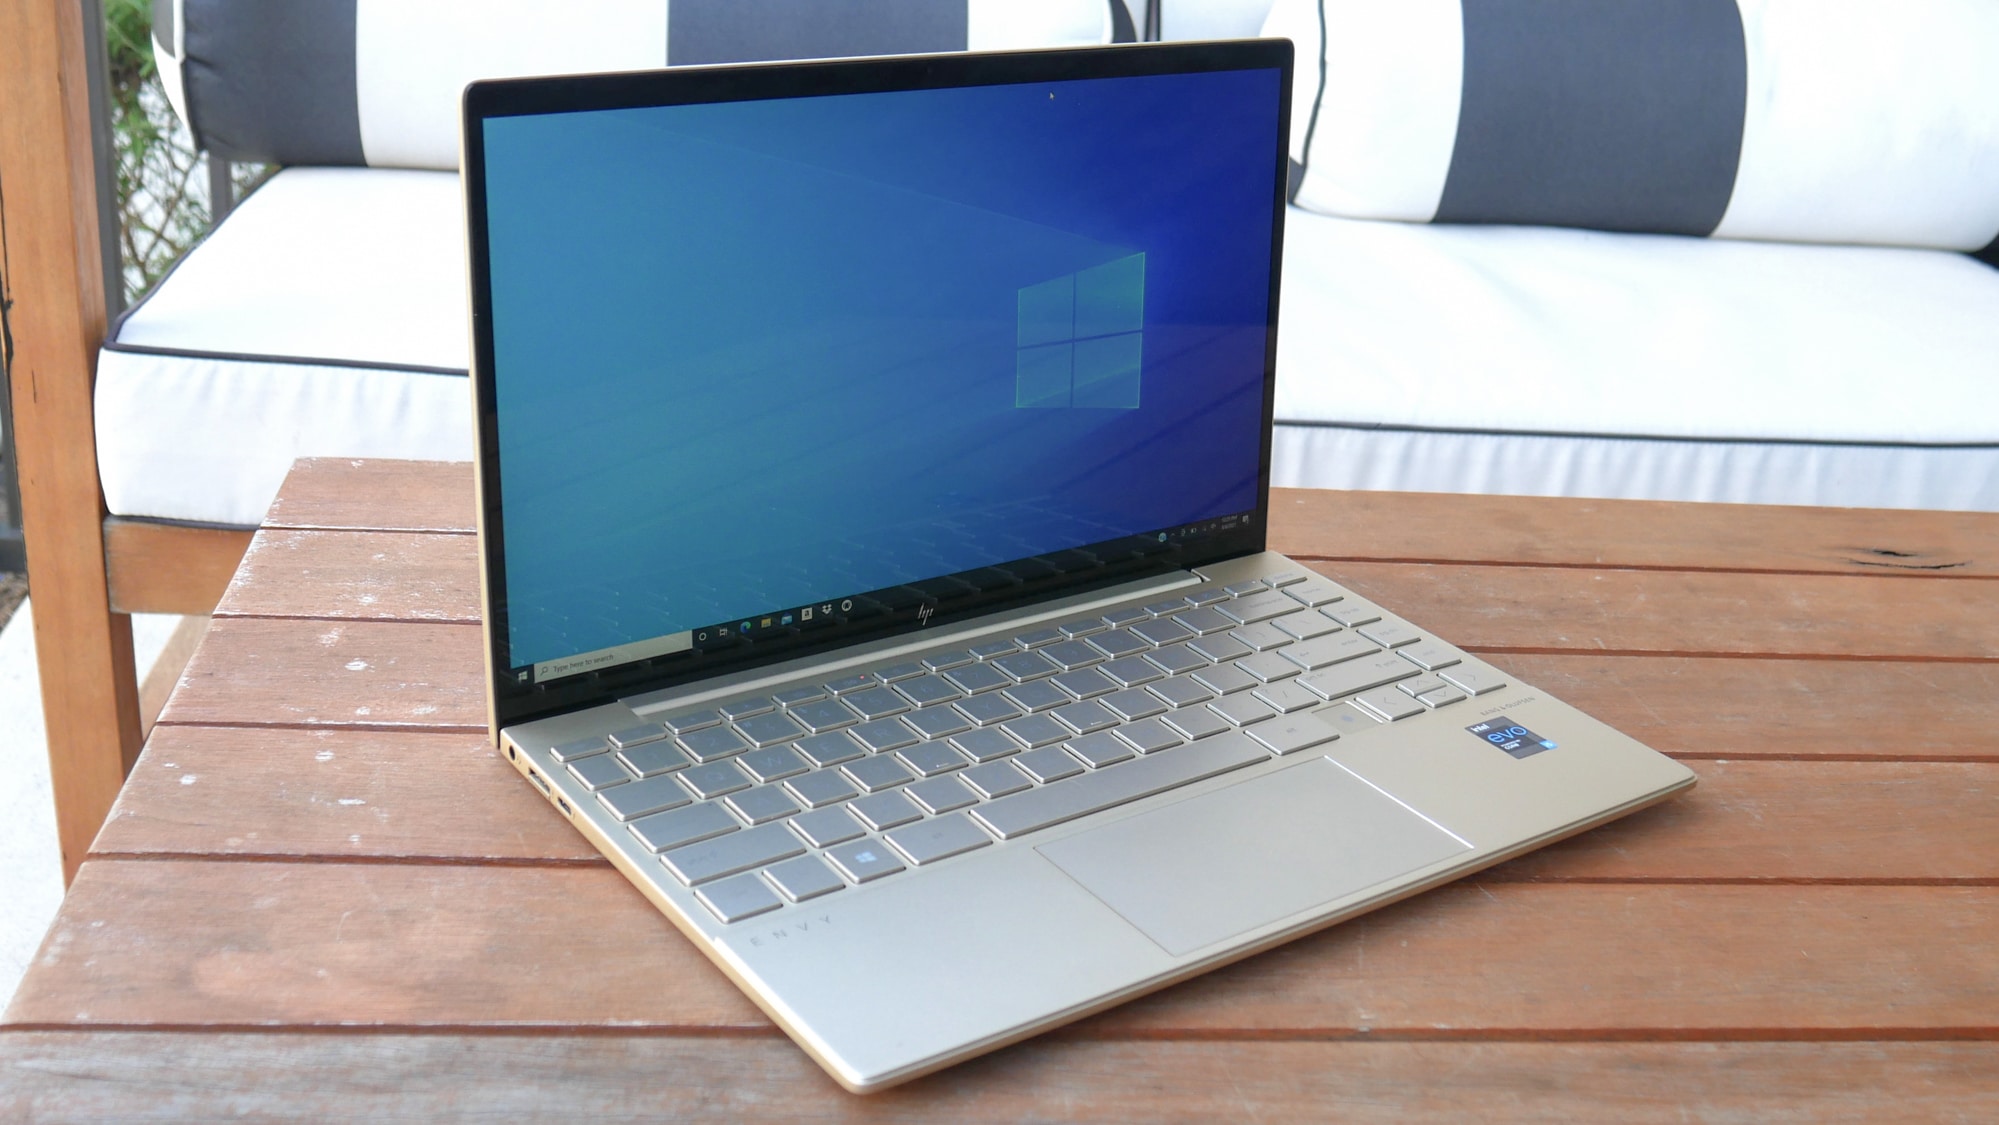 Top 5 Reasons Why You Should Rent a Laptop Rather than Buying One